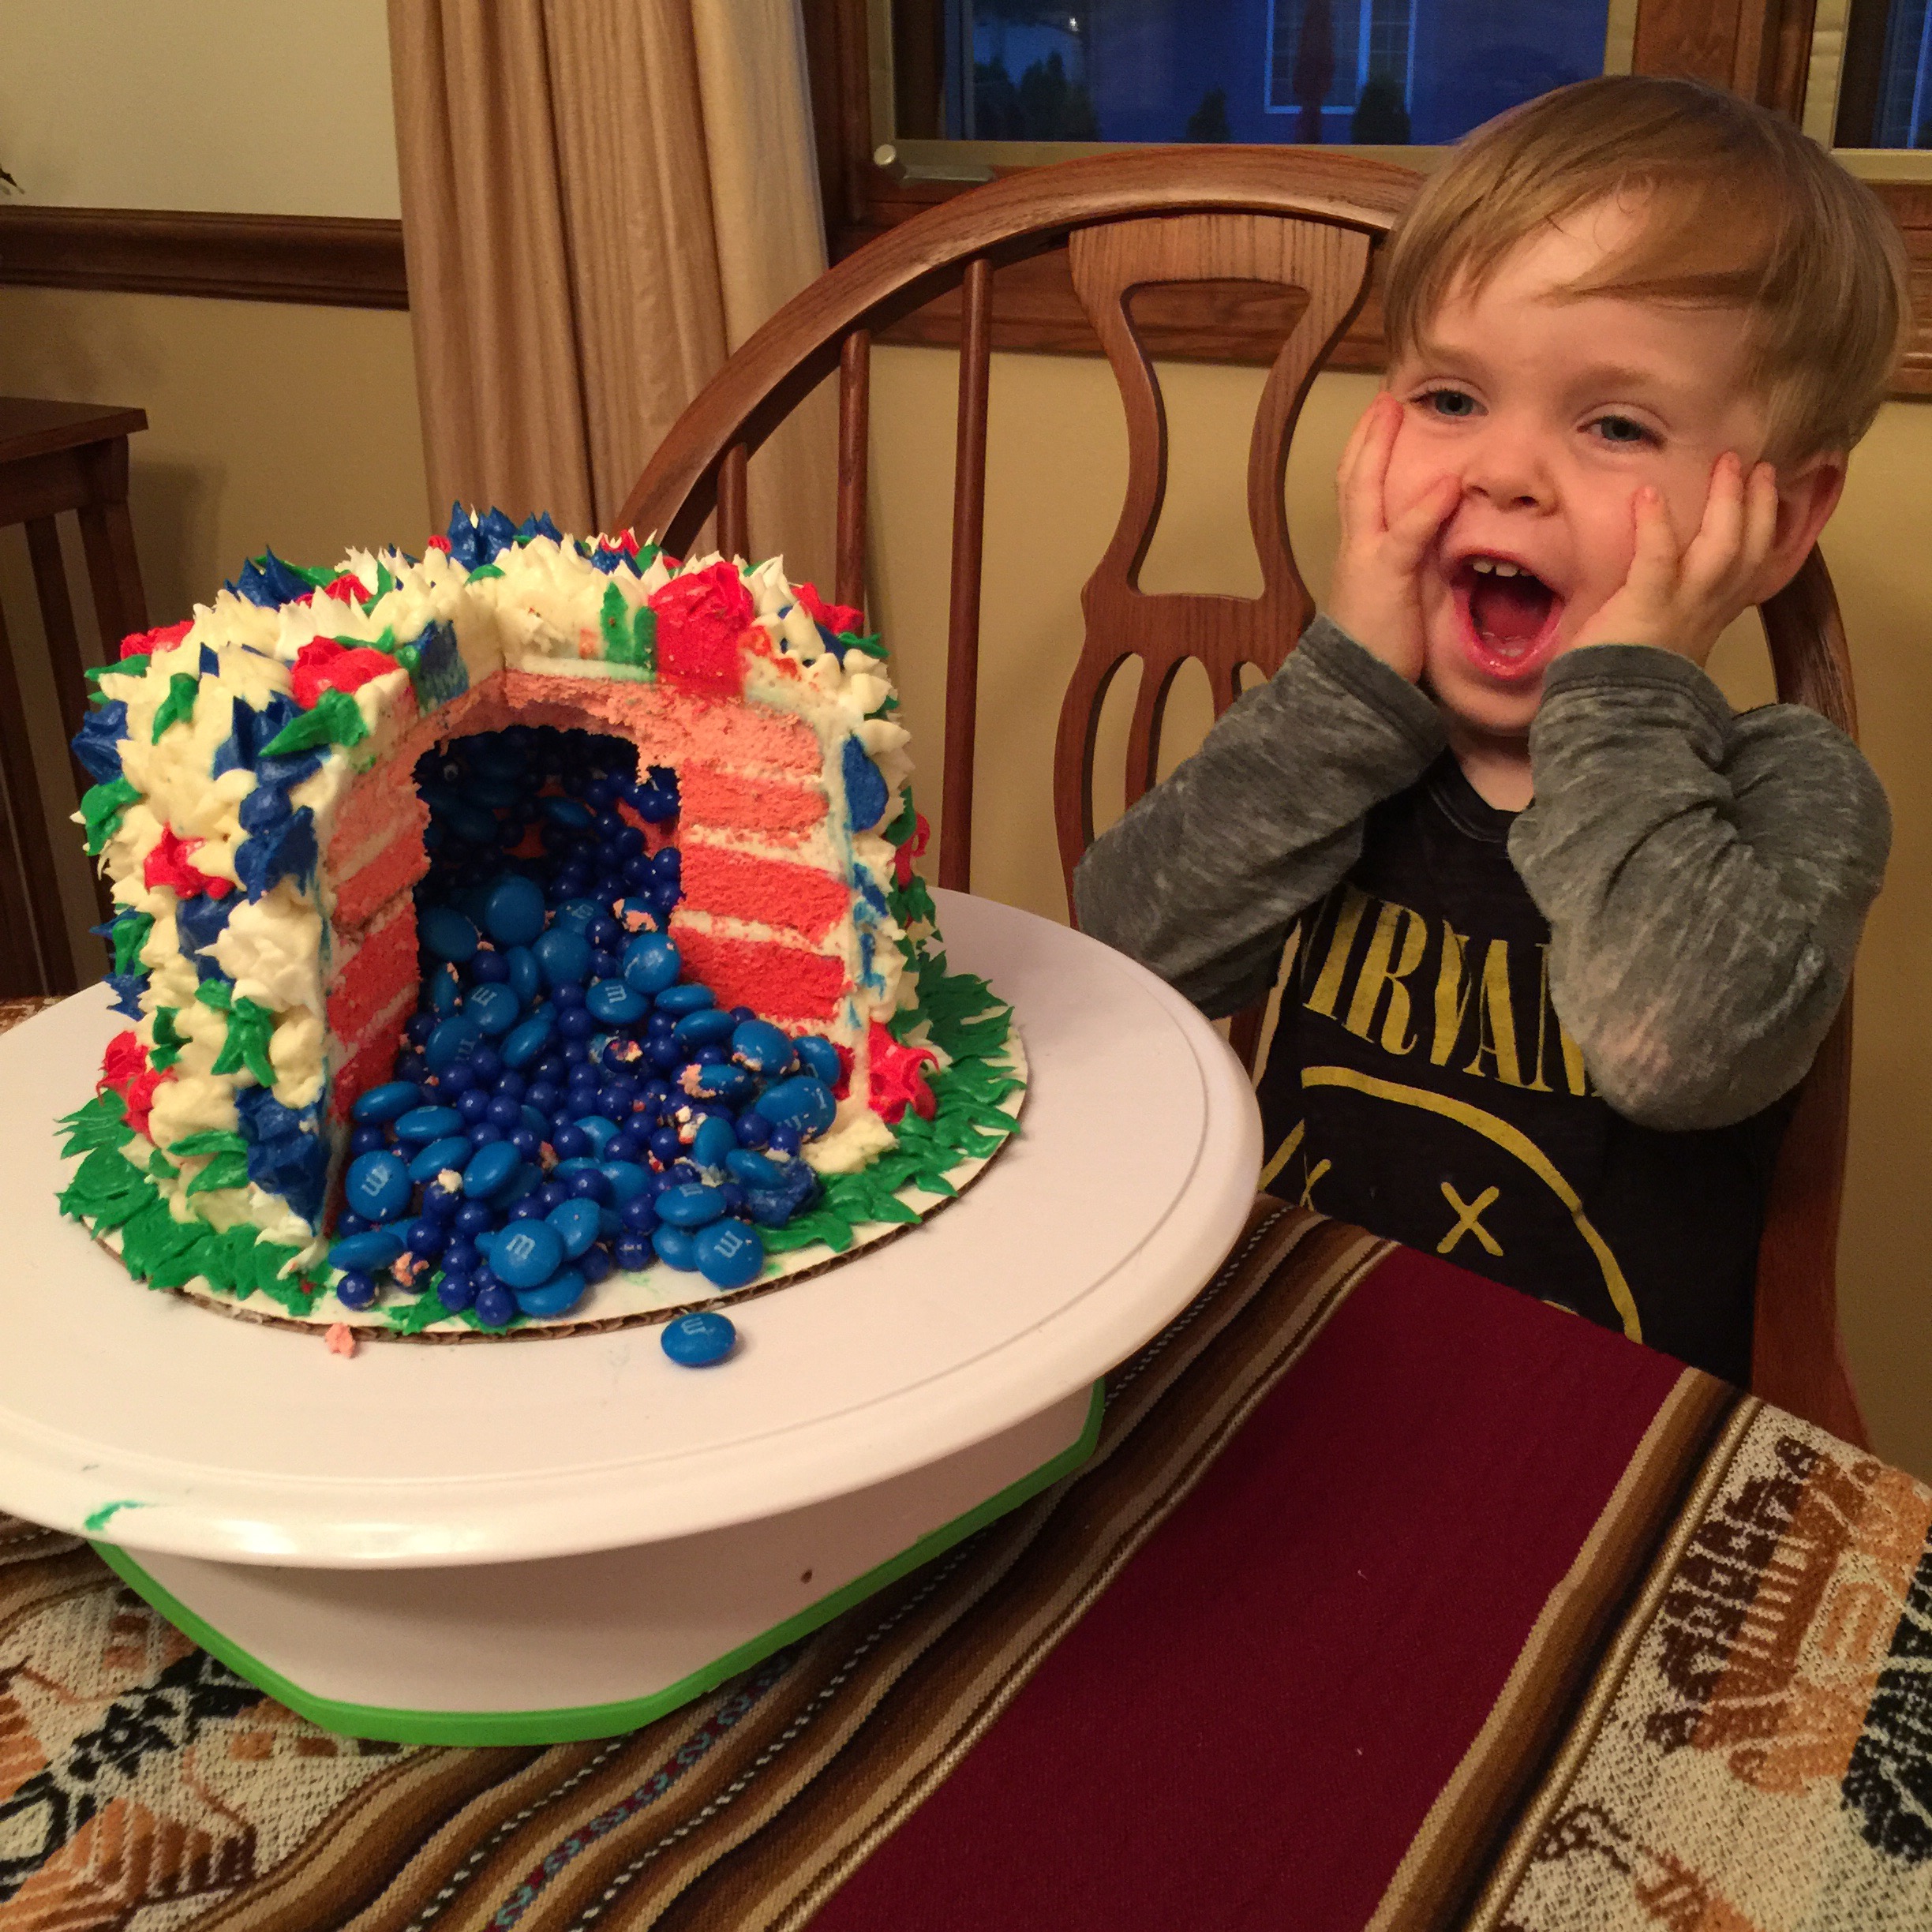 My toddler and the cake